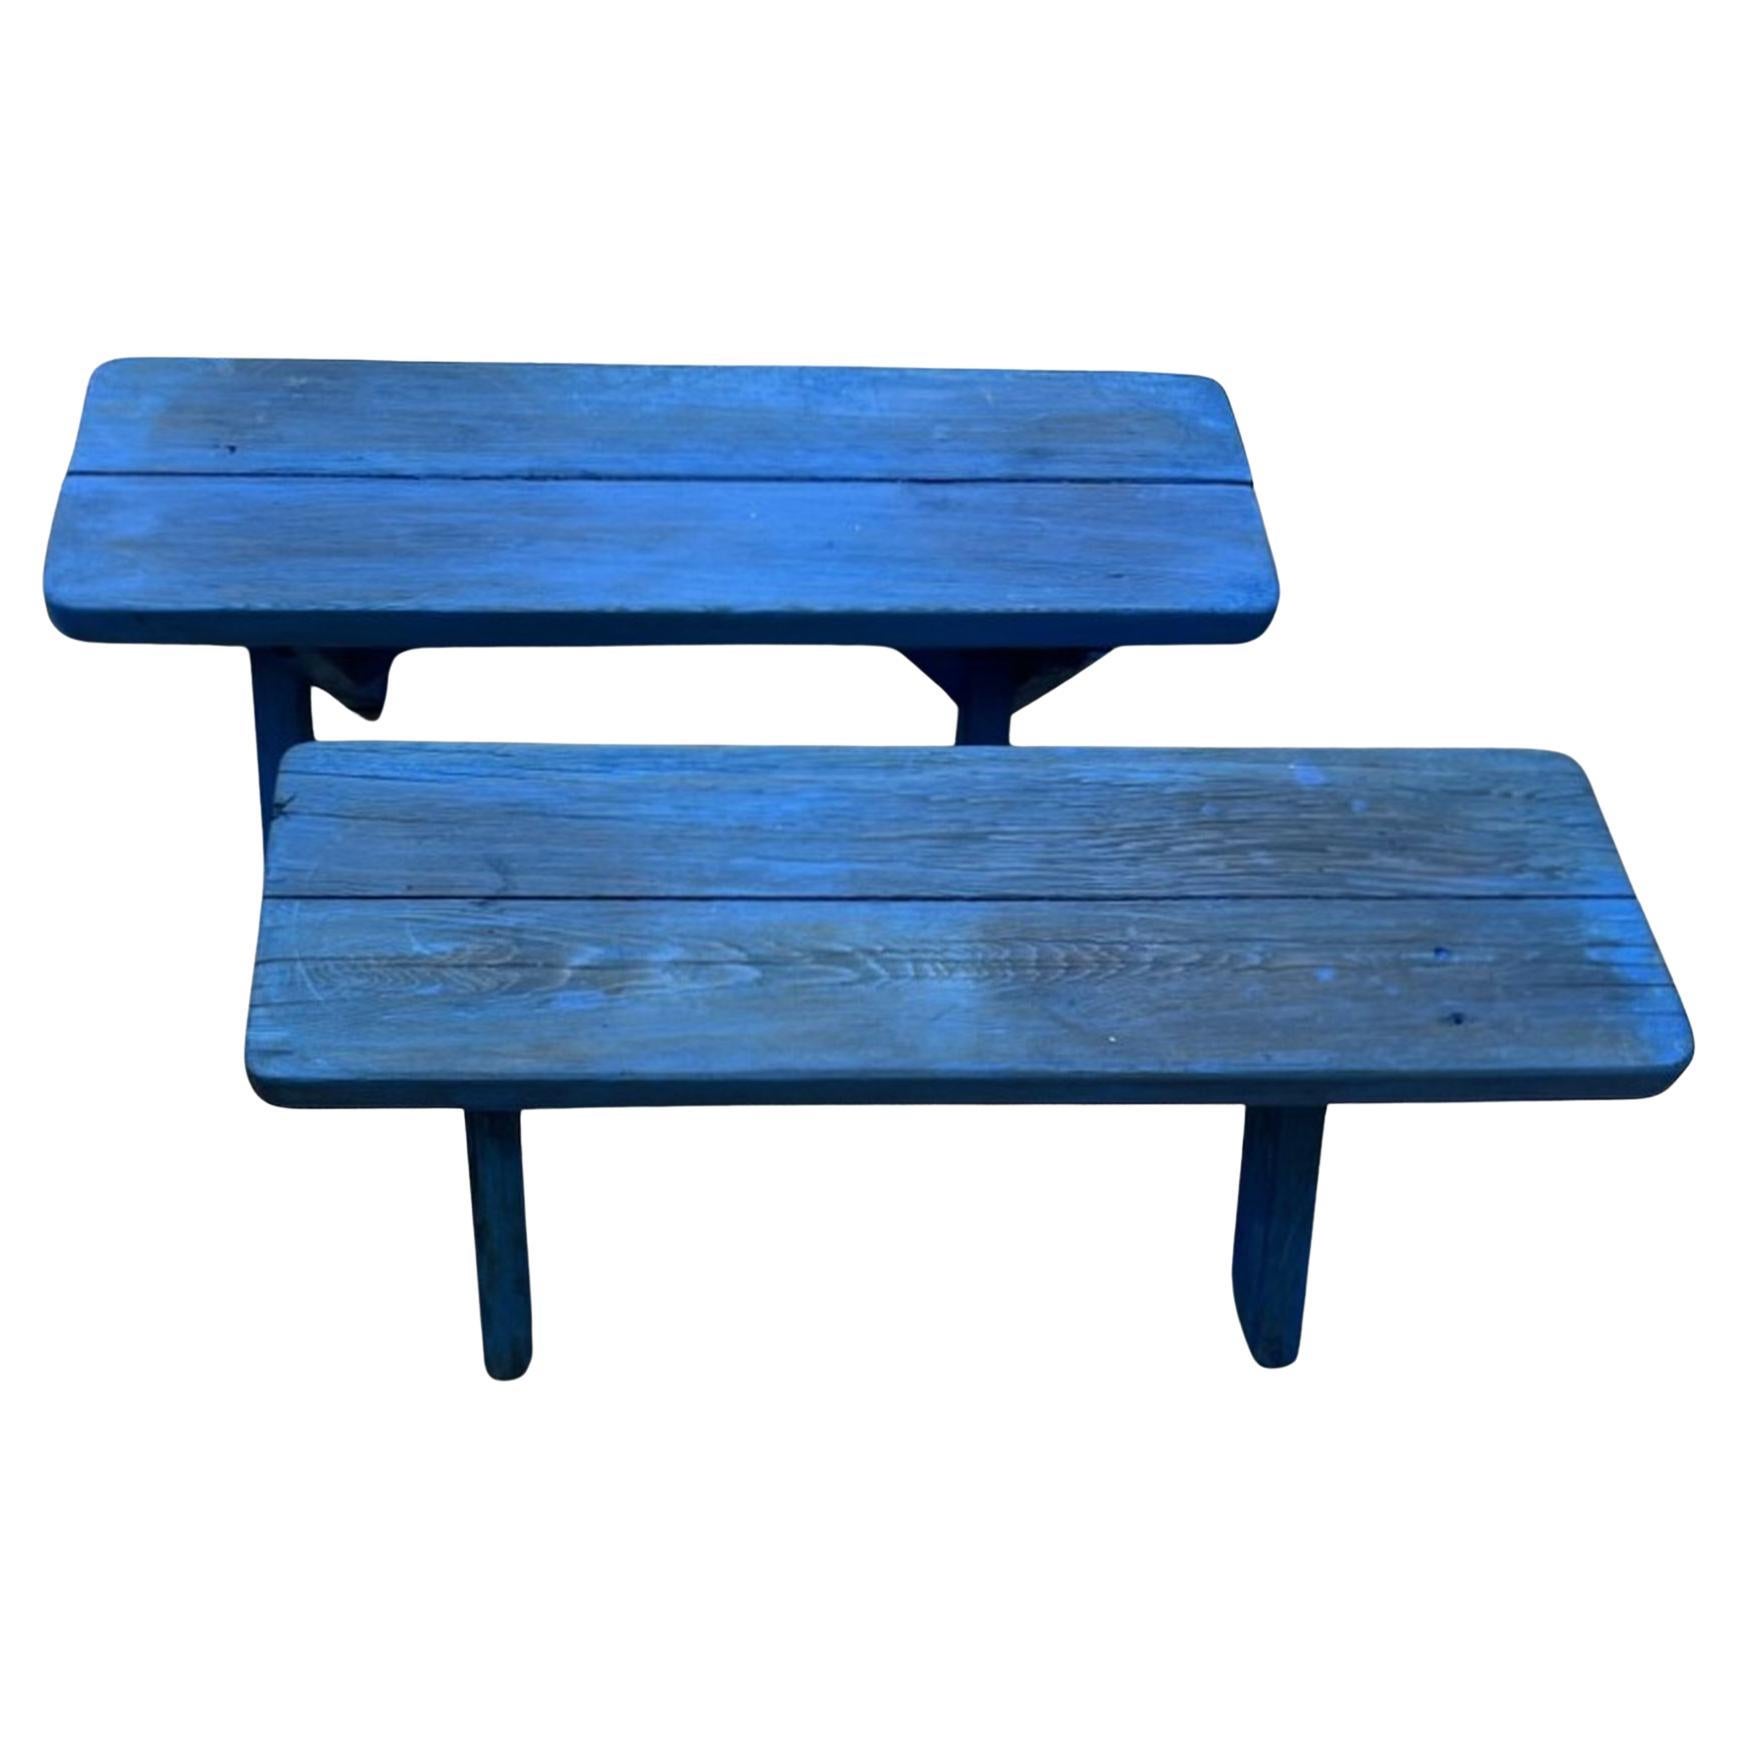 Pair of Blue painted Picnic Benches For Sale